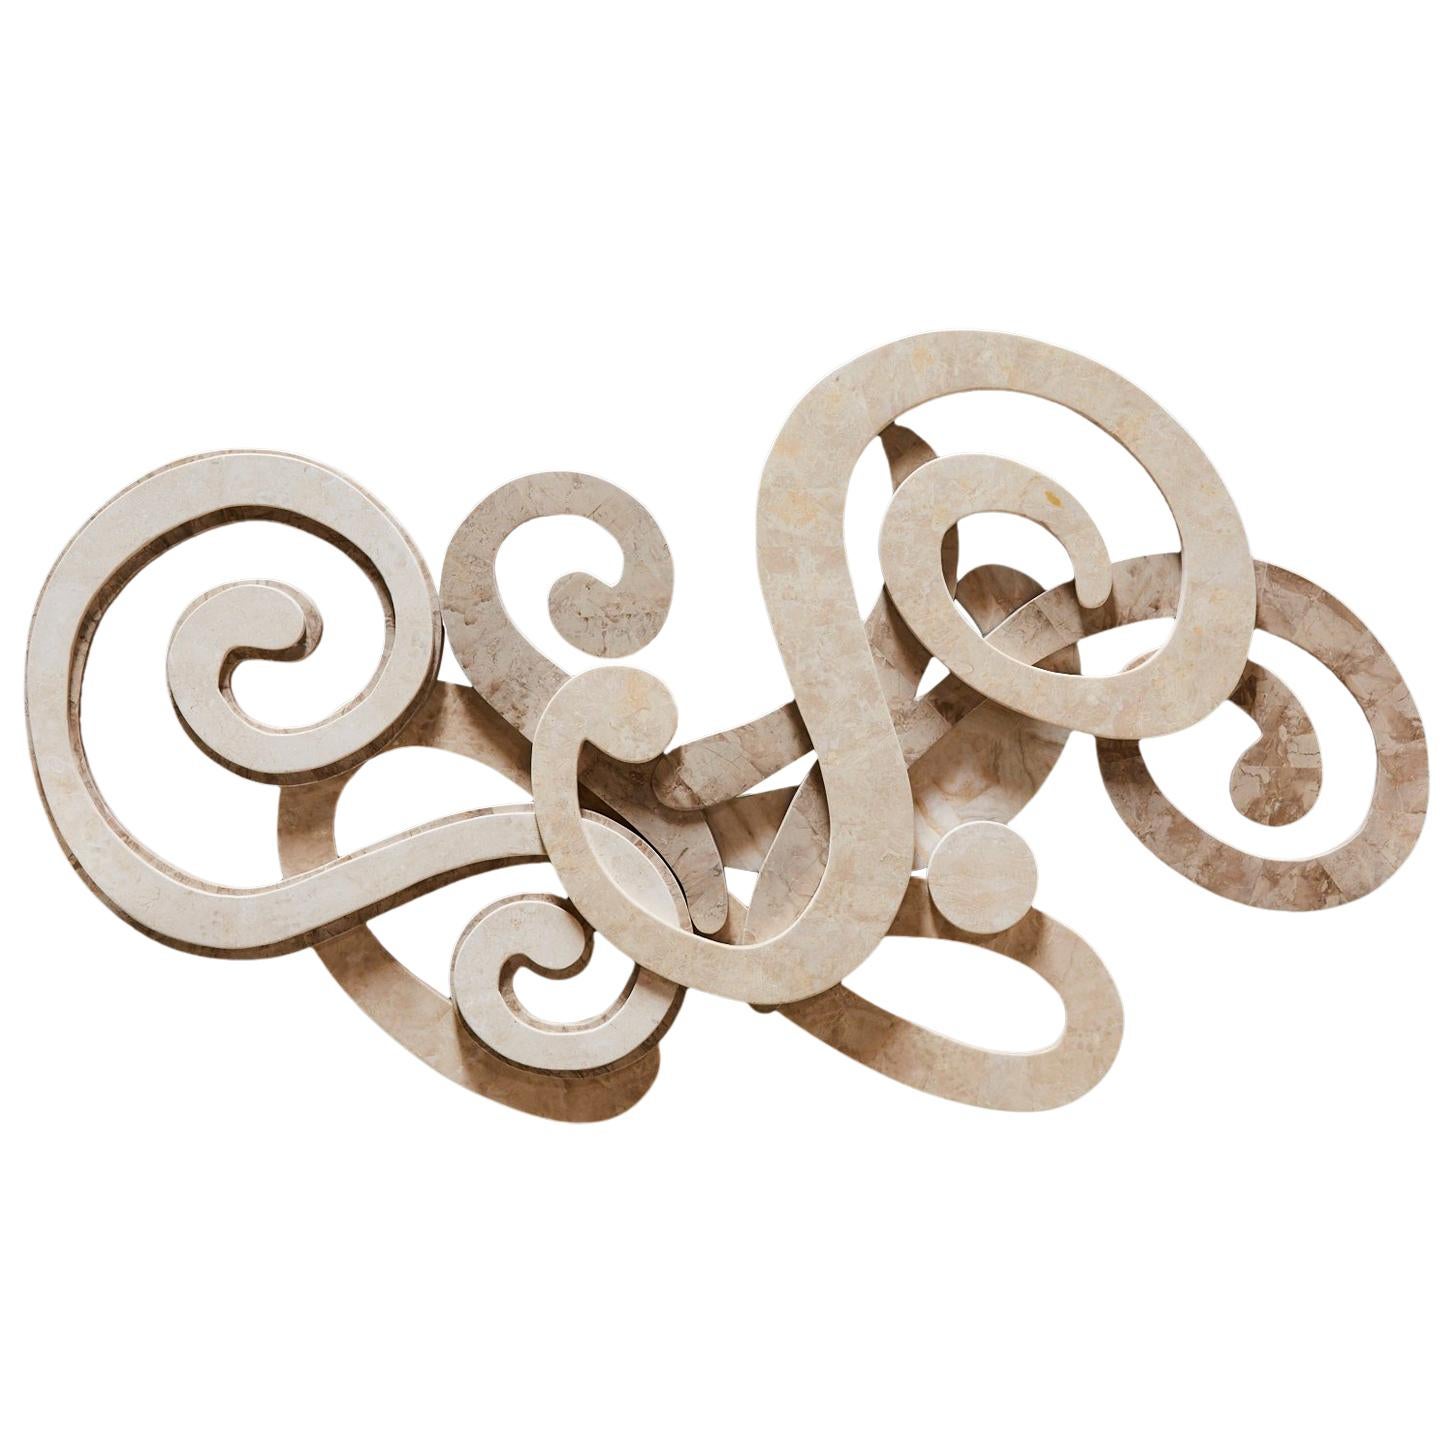 Swirl Tessellated Stone Wall Sculpture For Sale